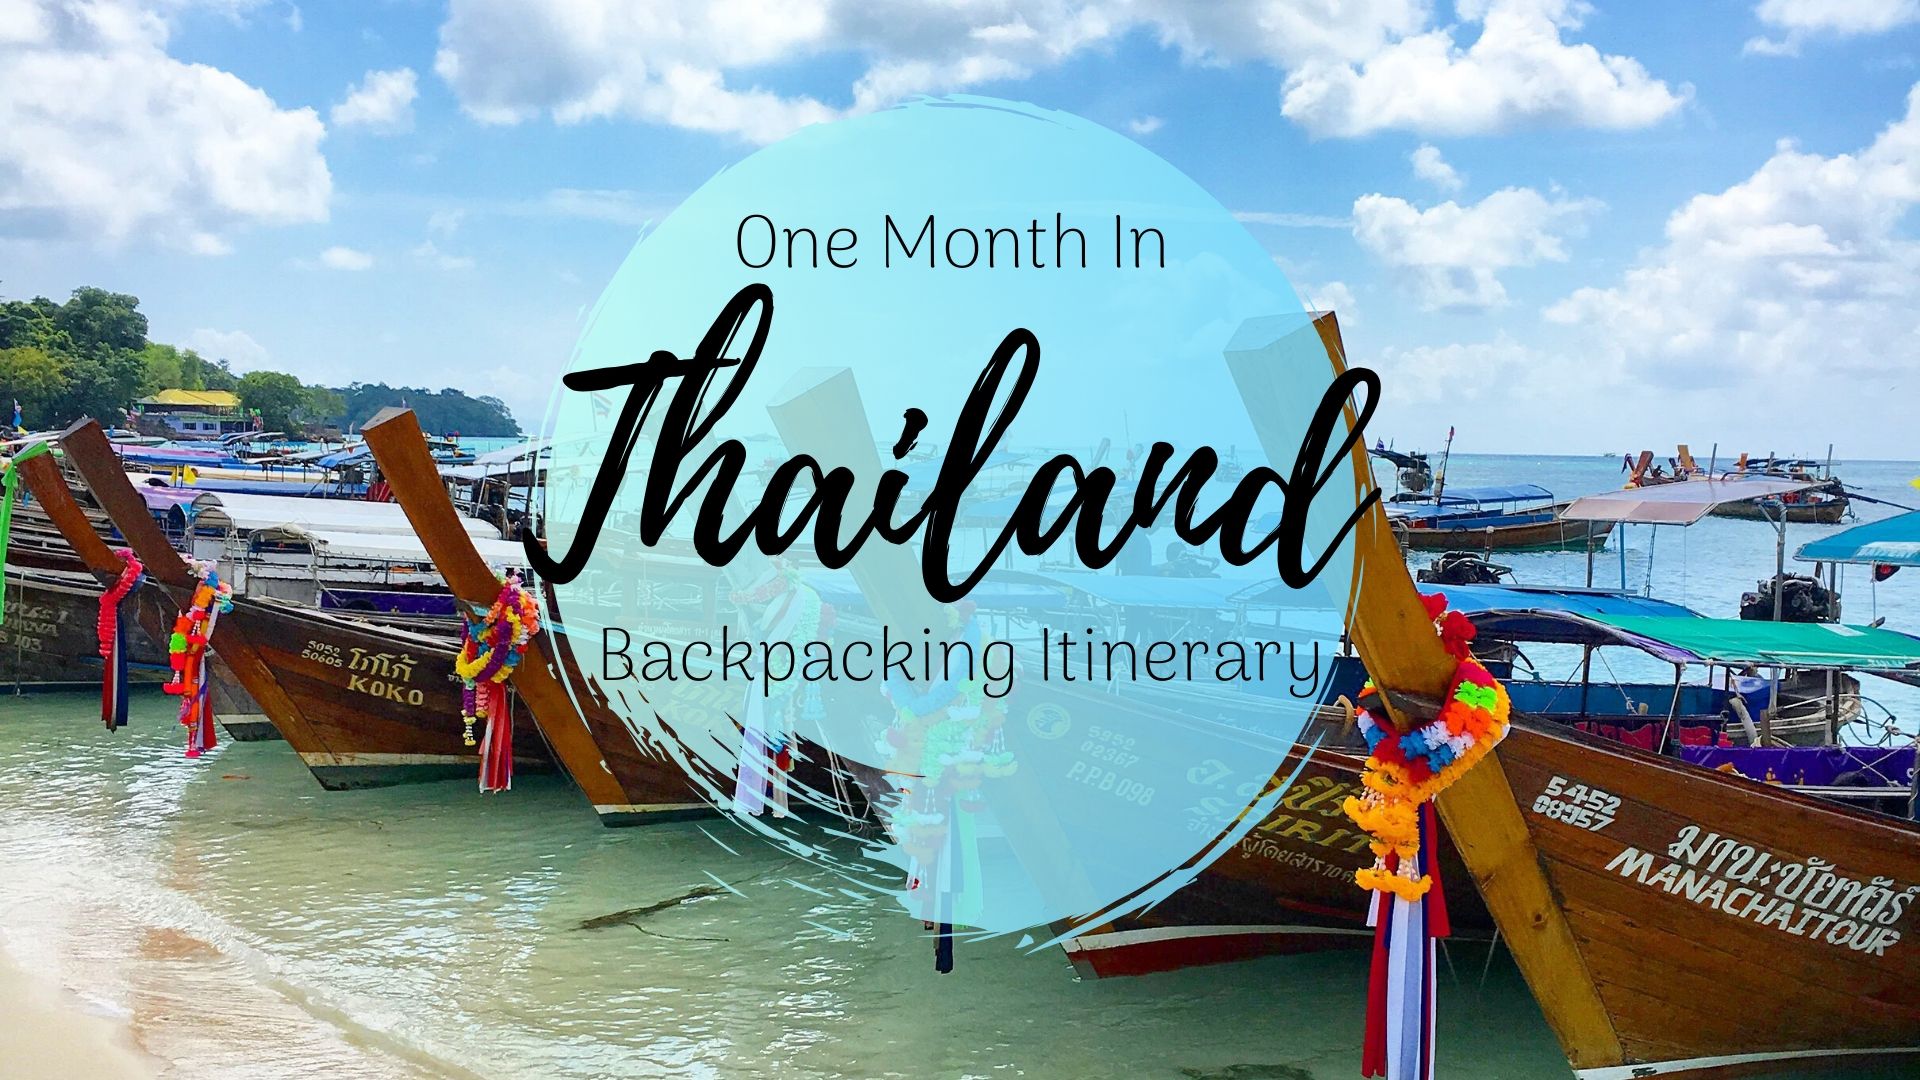 One Month in Thailand Itinerary – The Thailand Backpacking Route